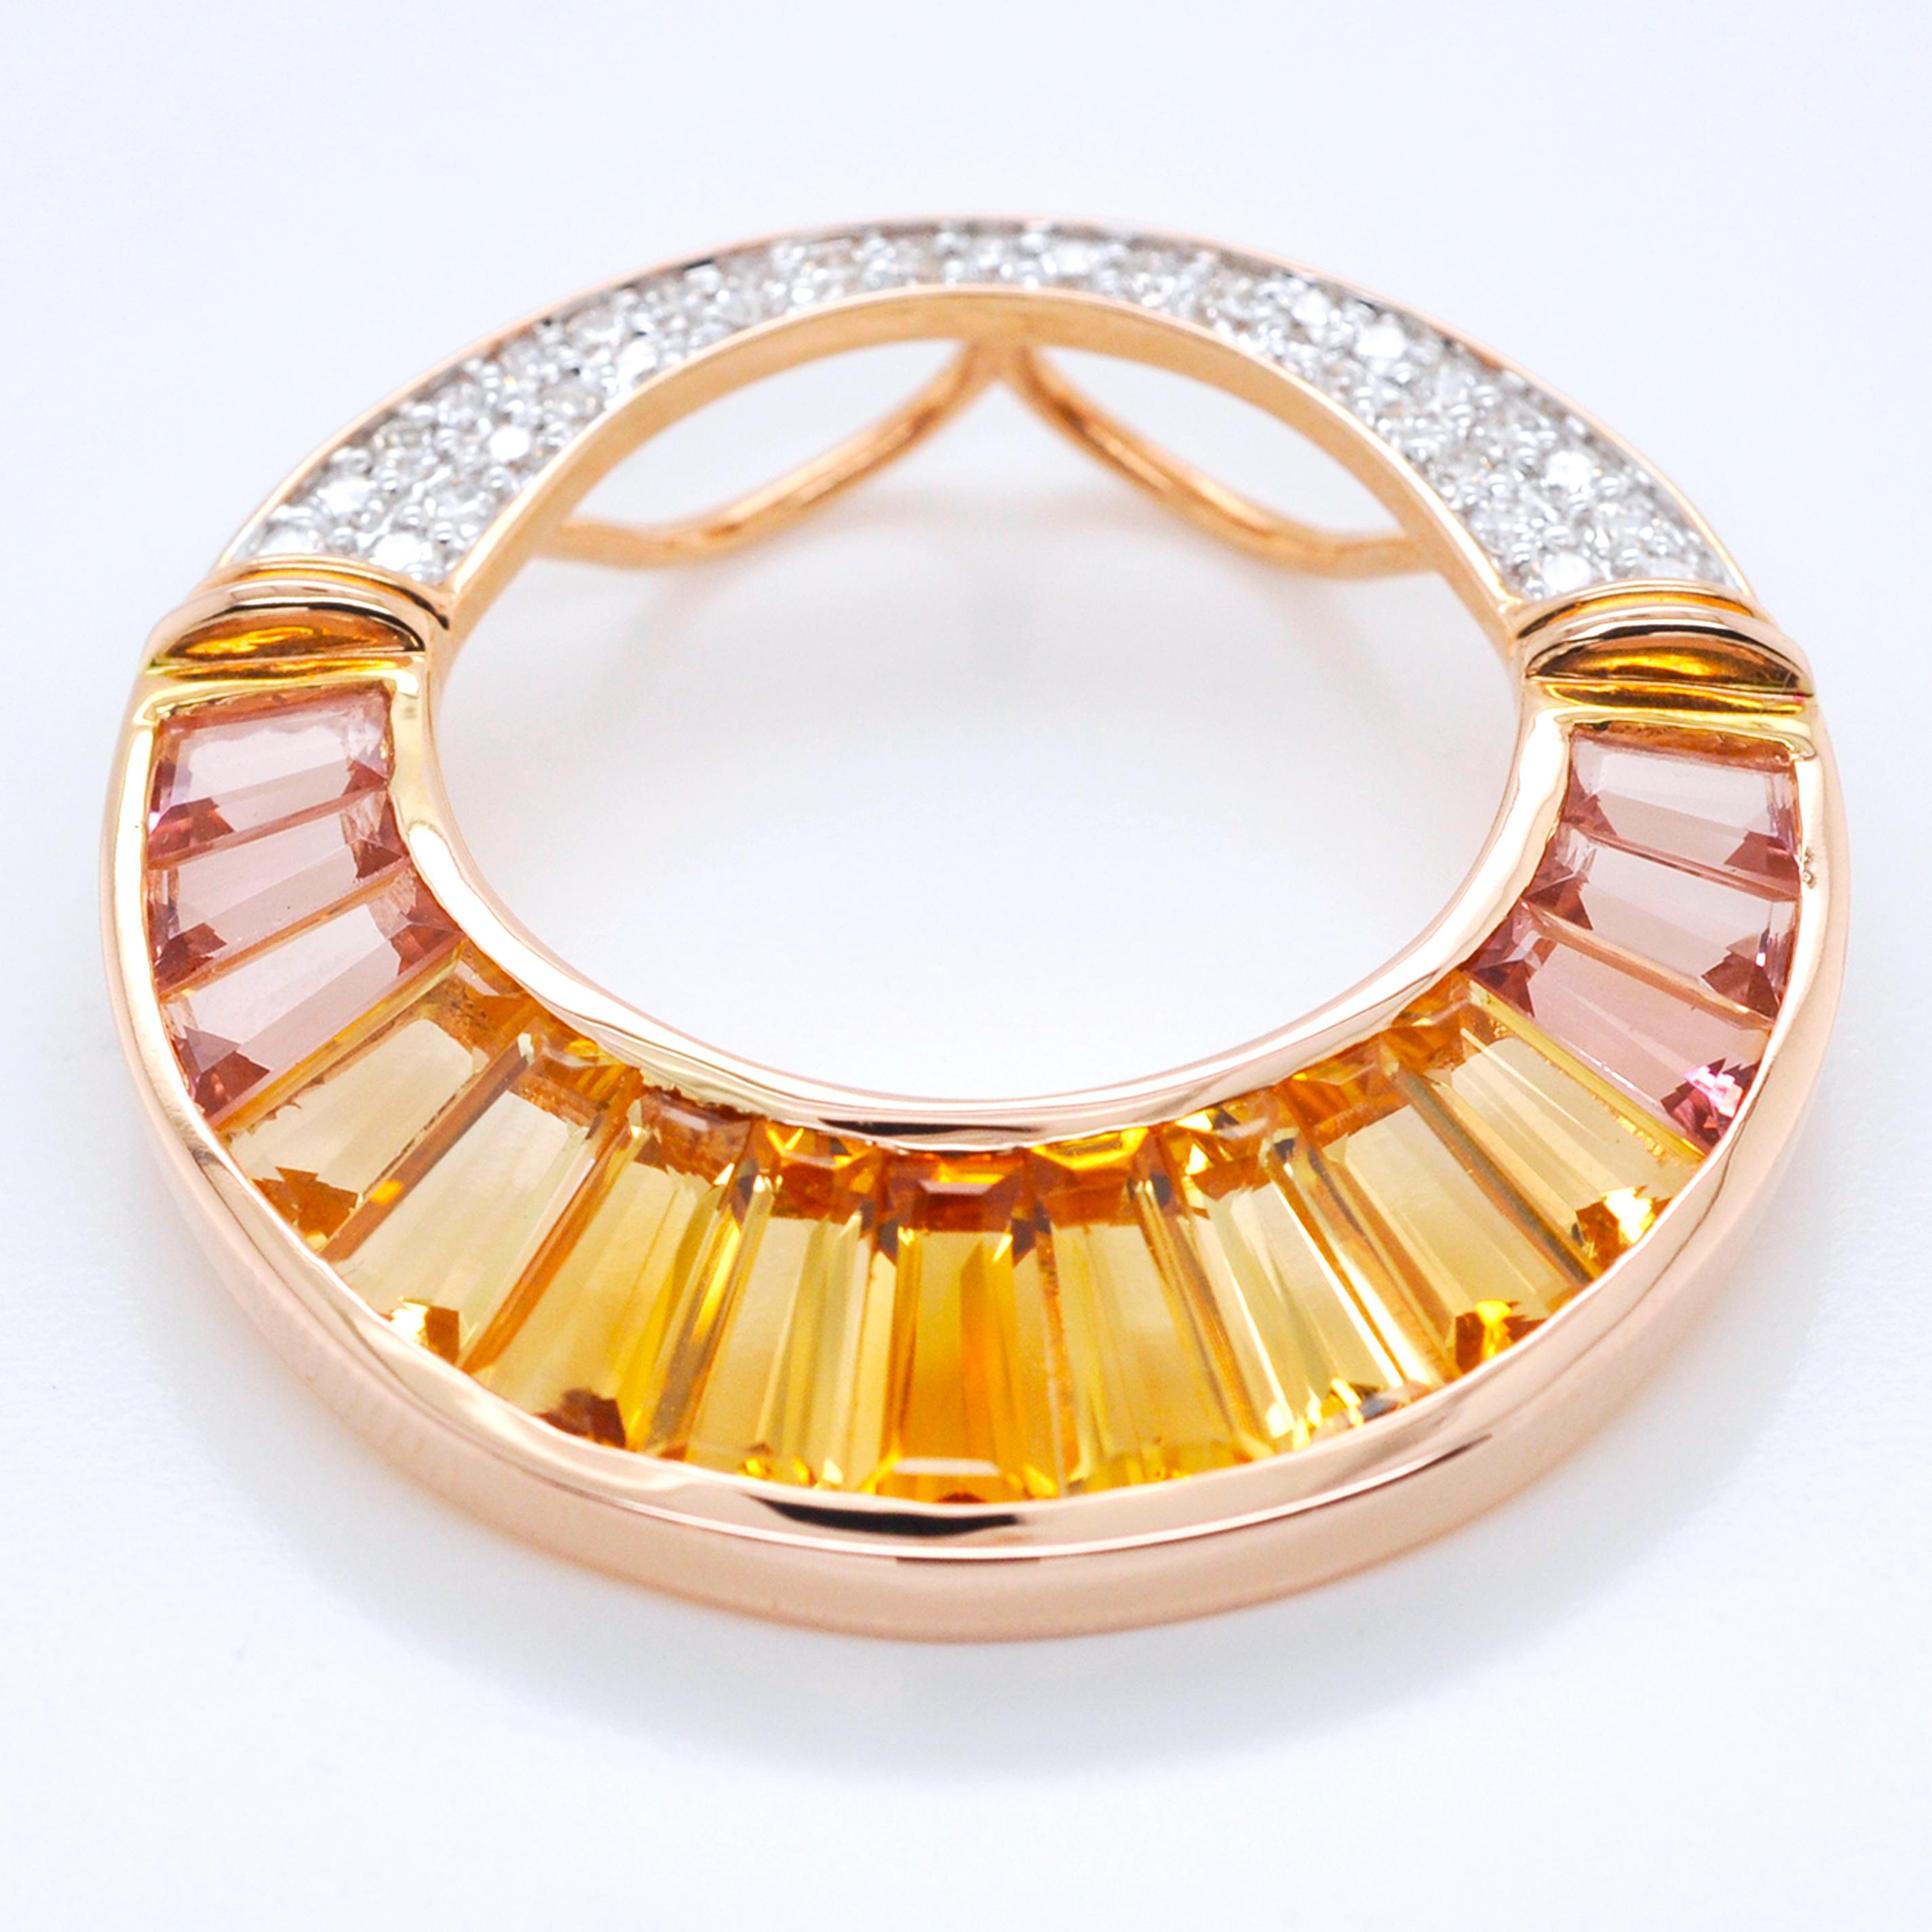 18 Karat Rose Gold Citrine Peach Tourmaline Diamond Pendant Necklace Brooch In New Condition For Sale In Jaipur, Rajasthan